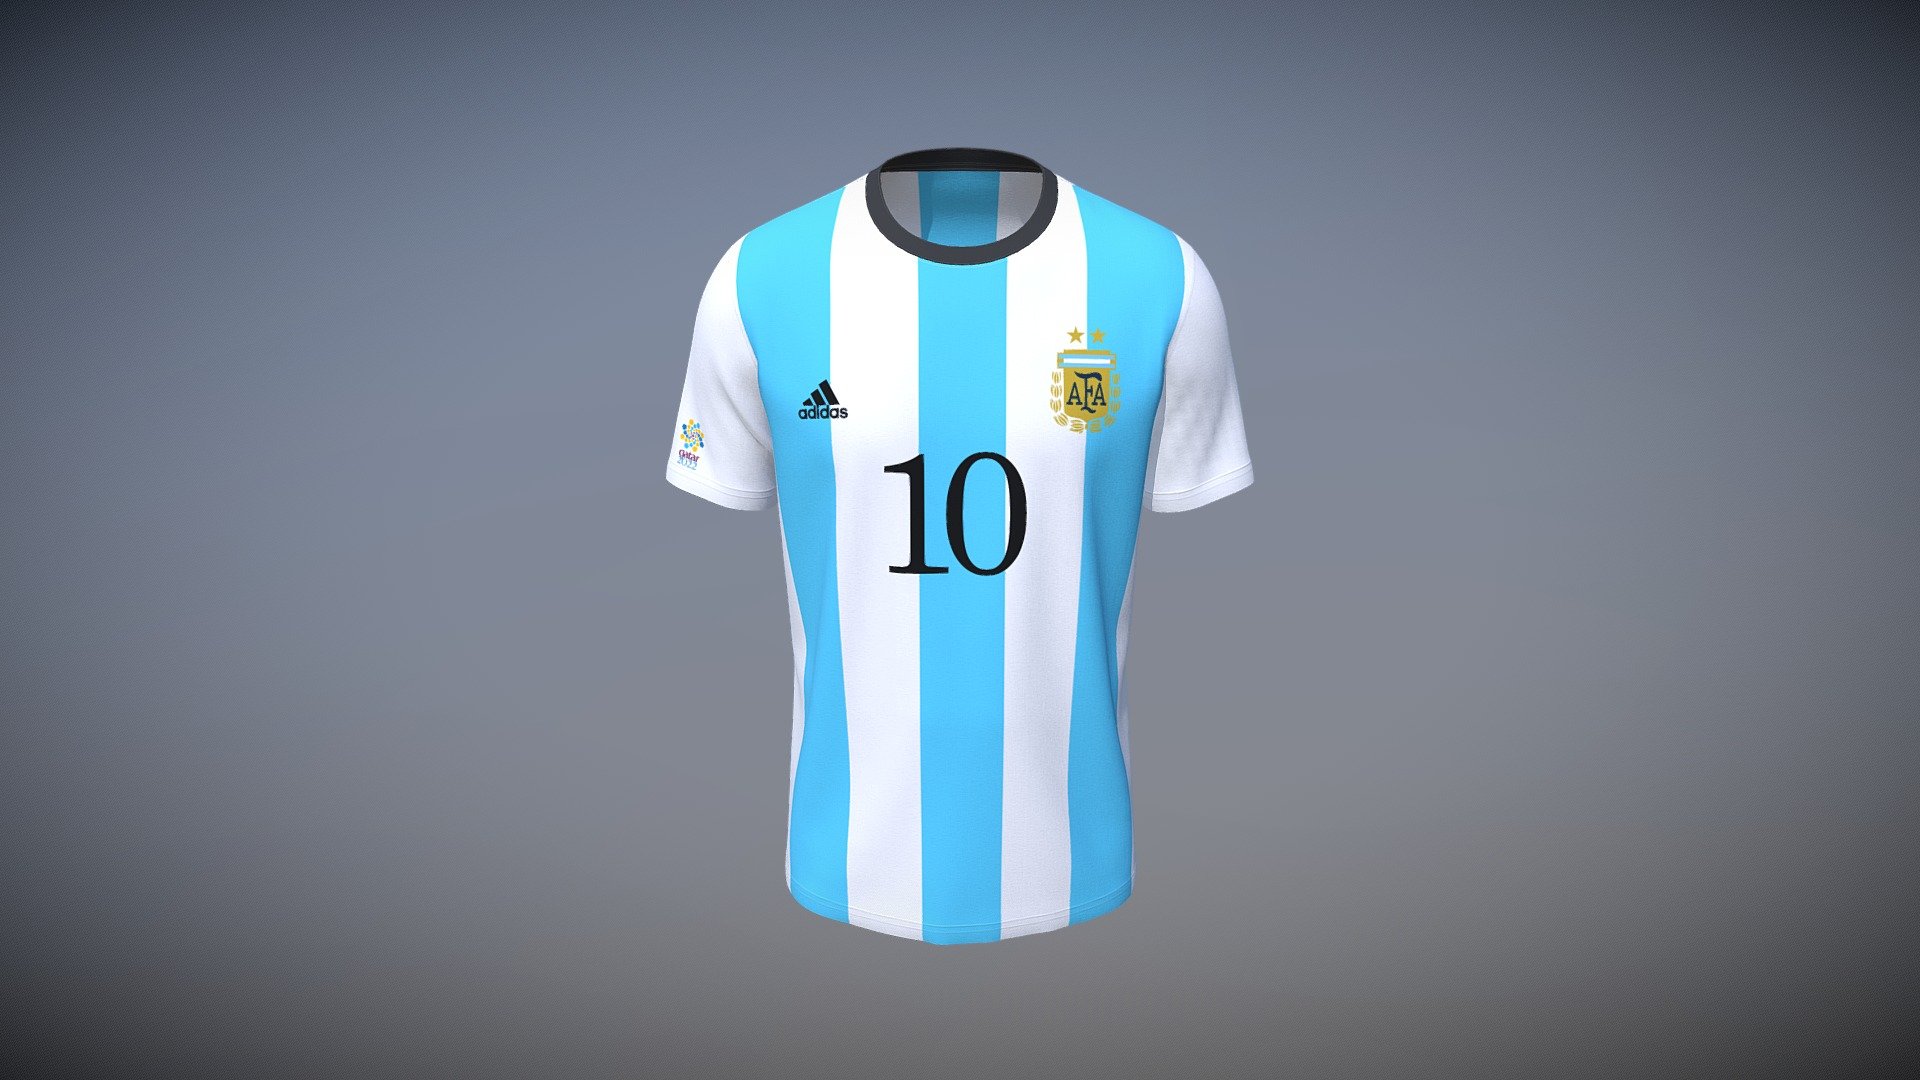 Cloth Title = Men's Replica Adidas Messi Argentina Jersey (Low Poly)

SKU = DG100044 

Category = Unisex 

Product Type = T-Shirt 

Cloth Length = Regular 

Body Fit = Loose Fit 

Occasion = Casual  

Sleeve Style = Set In Sleeve


Our Services:

3D Apparel Design.

OBJ,FBX,GLTF Making with High/Low Poly.

Fabric Digitalization.

Mockup making.

3D Teck Pack.

Pattern Making.

2D Illustration.

Cloth Animation and 360 Spin Video.


Contact us:- 

Email: info@digitalfashionwear.com 

Website: https://digitalfashionwear.com 


We designed all the types of cloth specially focused on product visualization, e-commerce, fitting, and production. 

We will design: 

T-shirts 

Polo shirts 

Hoodies 

Sweatshirt 

Jackets 

Shirts 

TankTops 

Trousers 

Bras 

Underwear 

Blazer 

Aprons 

Leggings 

and All Fashion items. 





Our goal is to make sure what we provide you, meets your demand 3d model